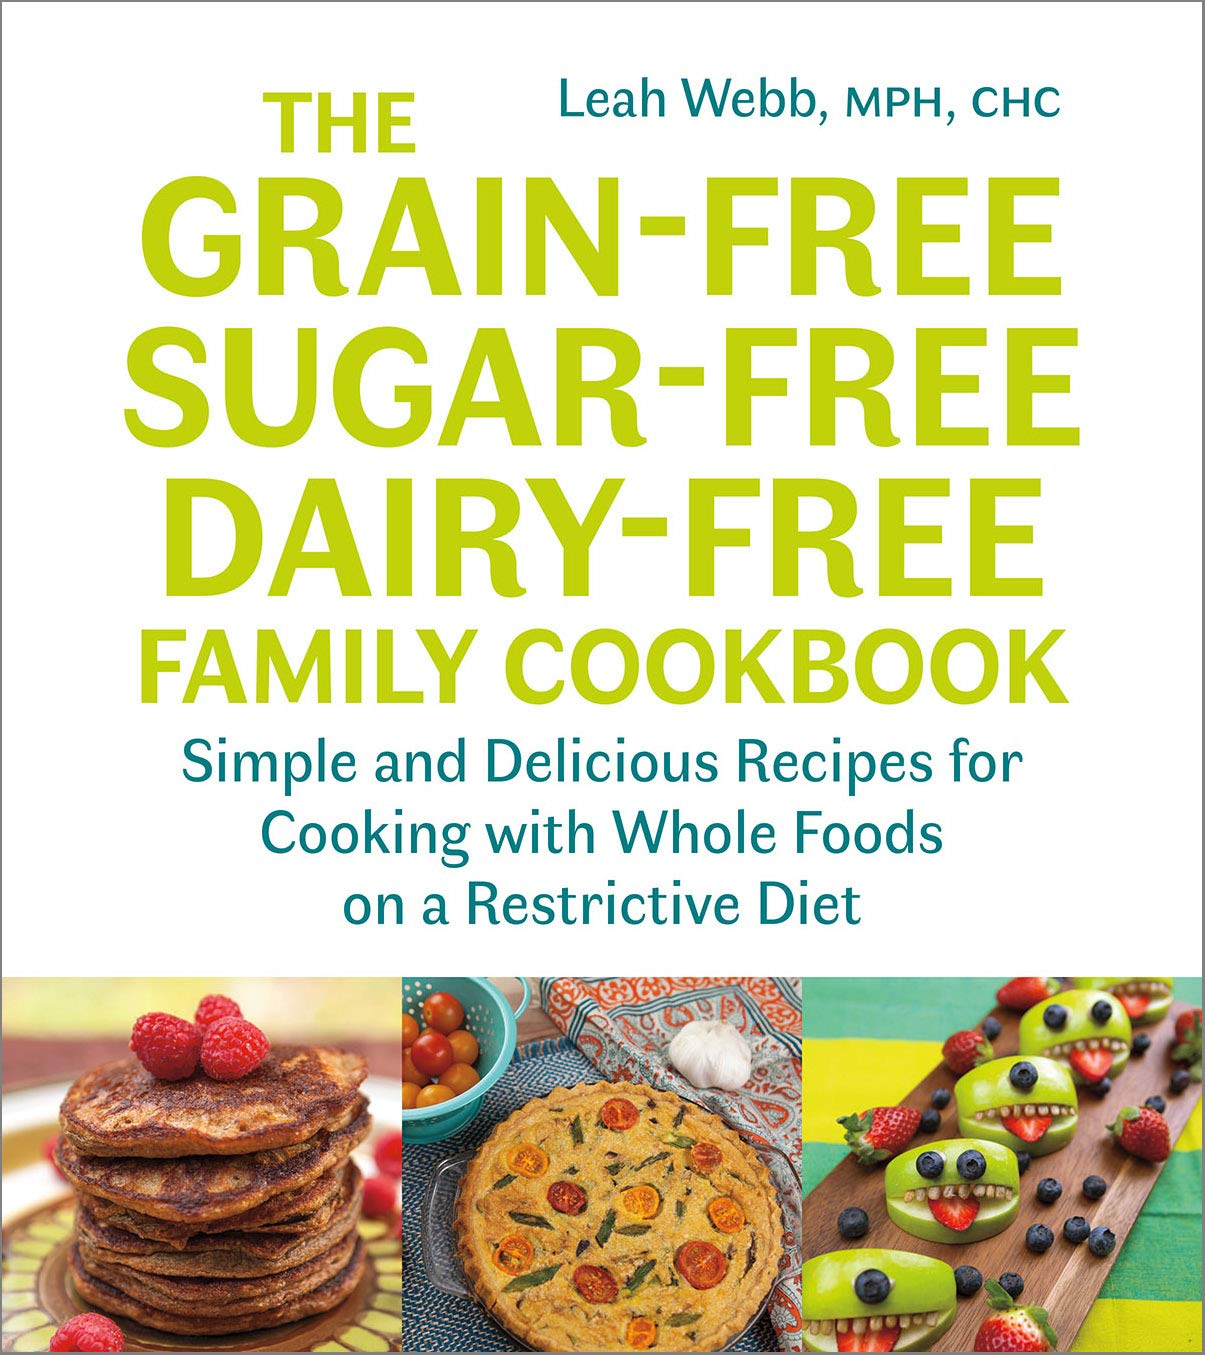 The Grain-Free, Sugar-Free, Dairy-Free Family Cookbook: Simple and Delicious Recipes for Cooking with Whole Foods on a Restrictive Diet (Leah Webb)